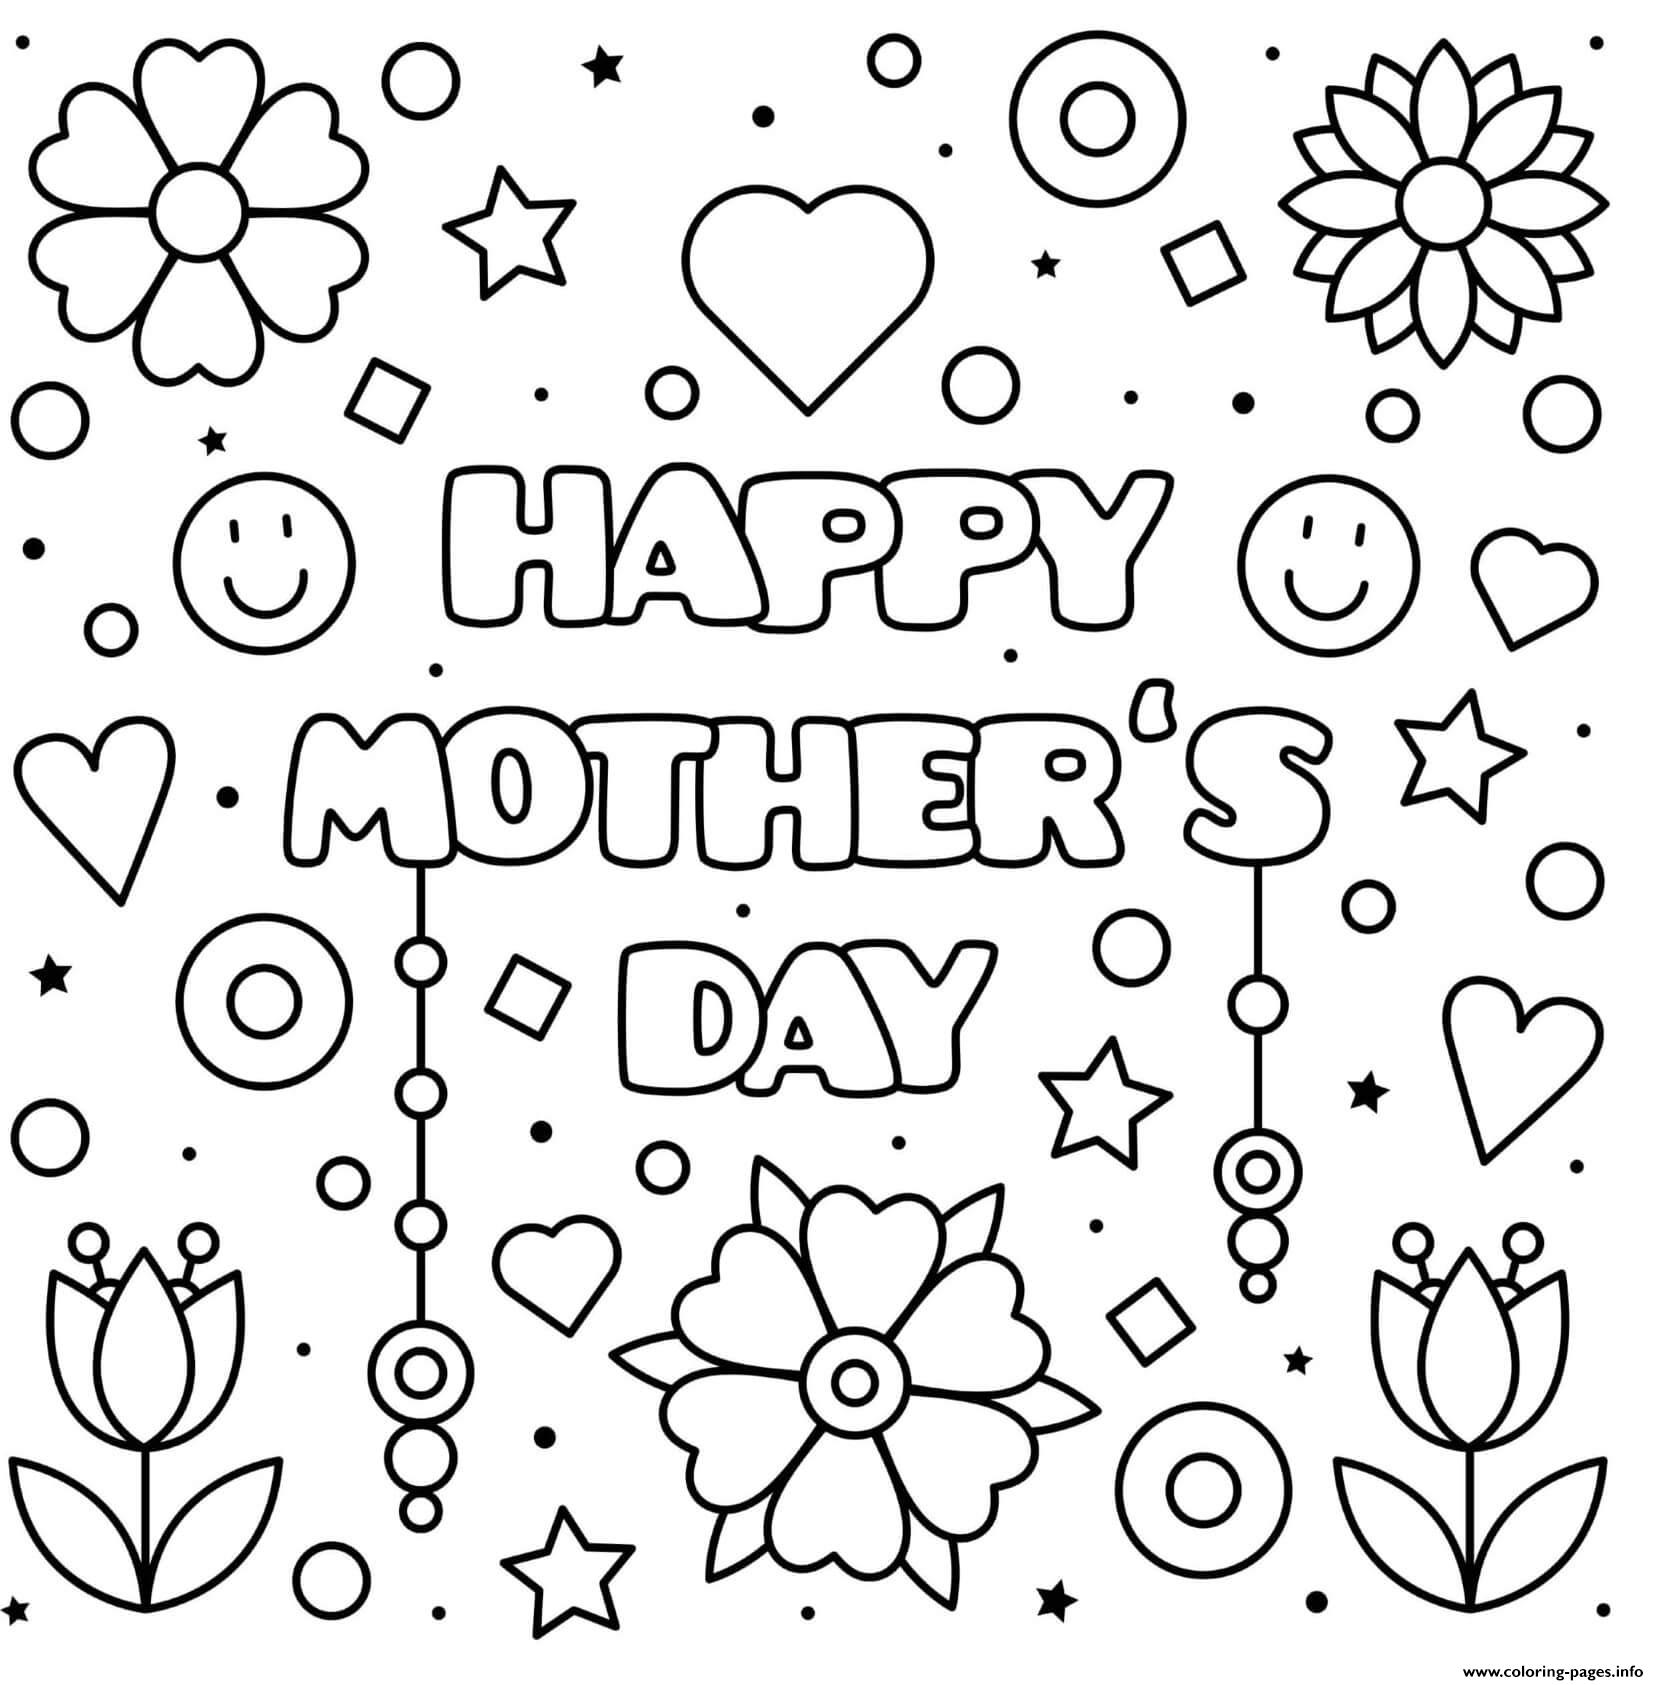 Mothers Day Sign Flowers Smiley Faces Hearts coloring